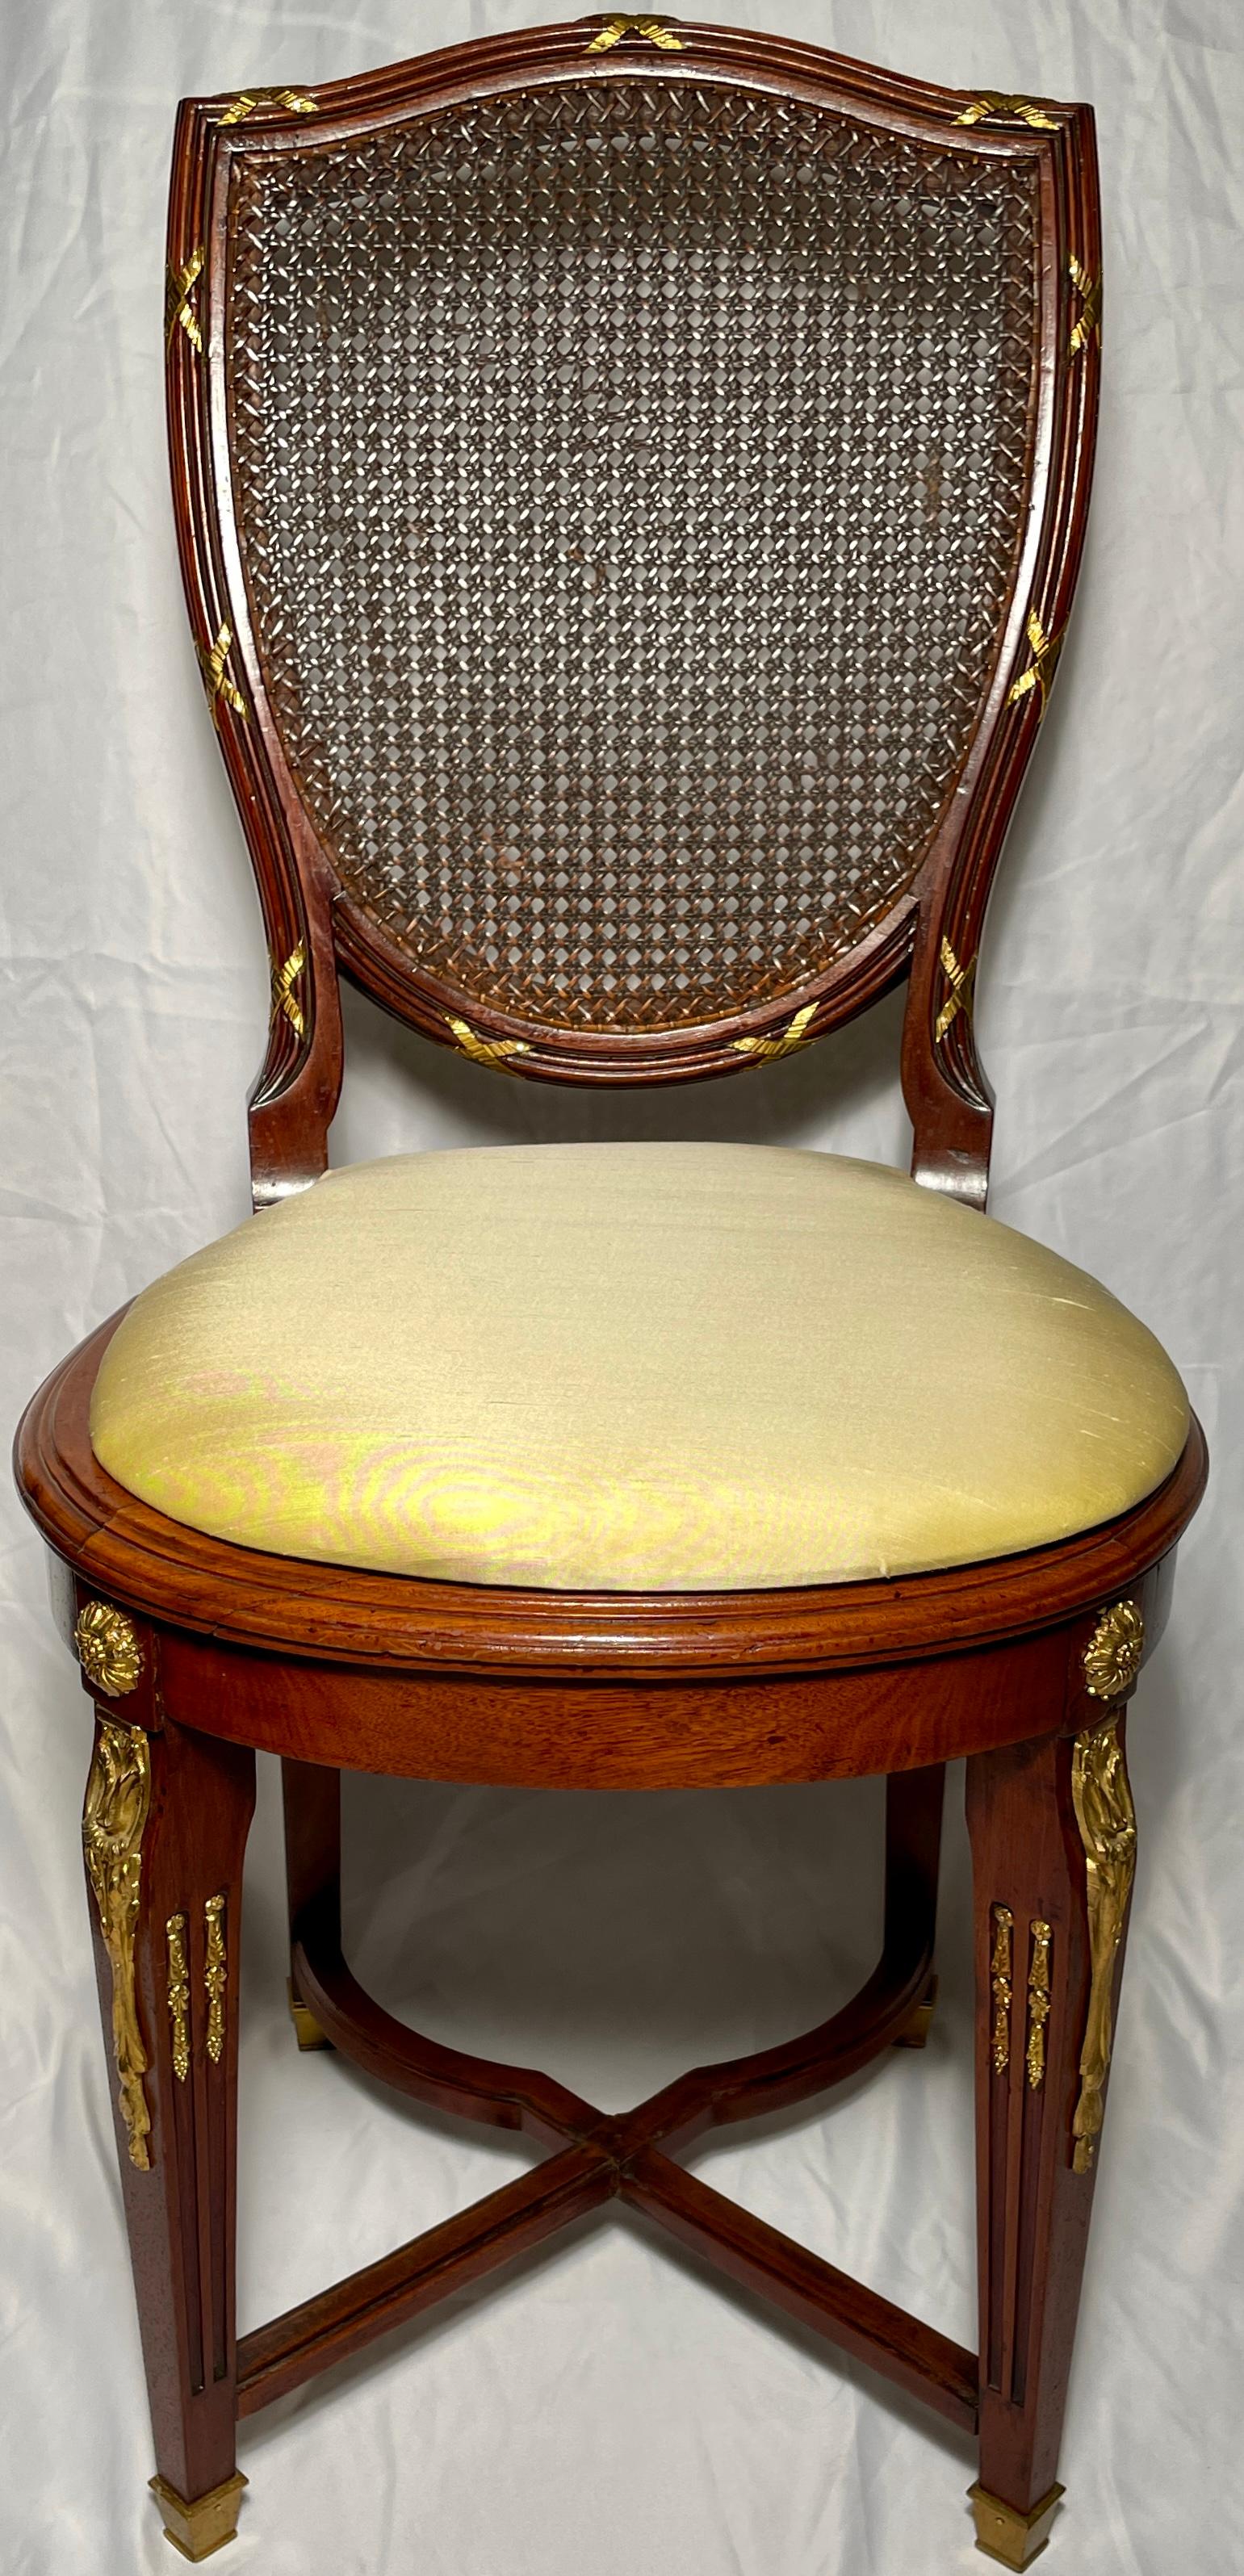 Pair antique French Louis XVI gold bronze mounted mahogany cane back chairs.